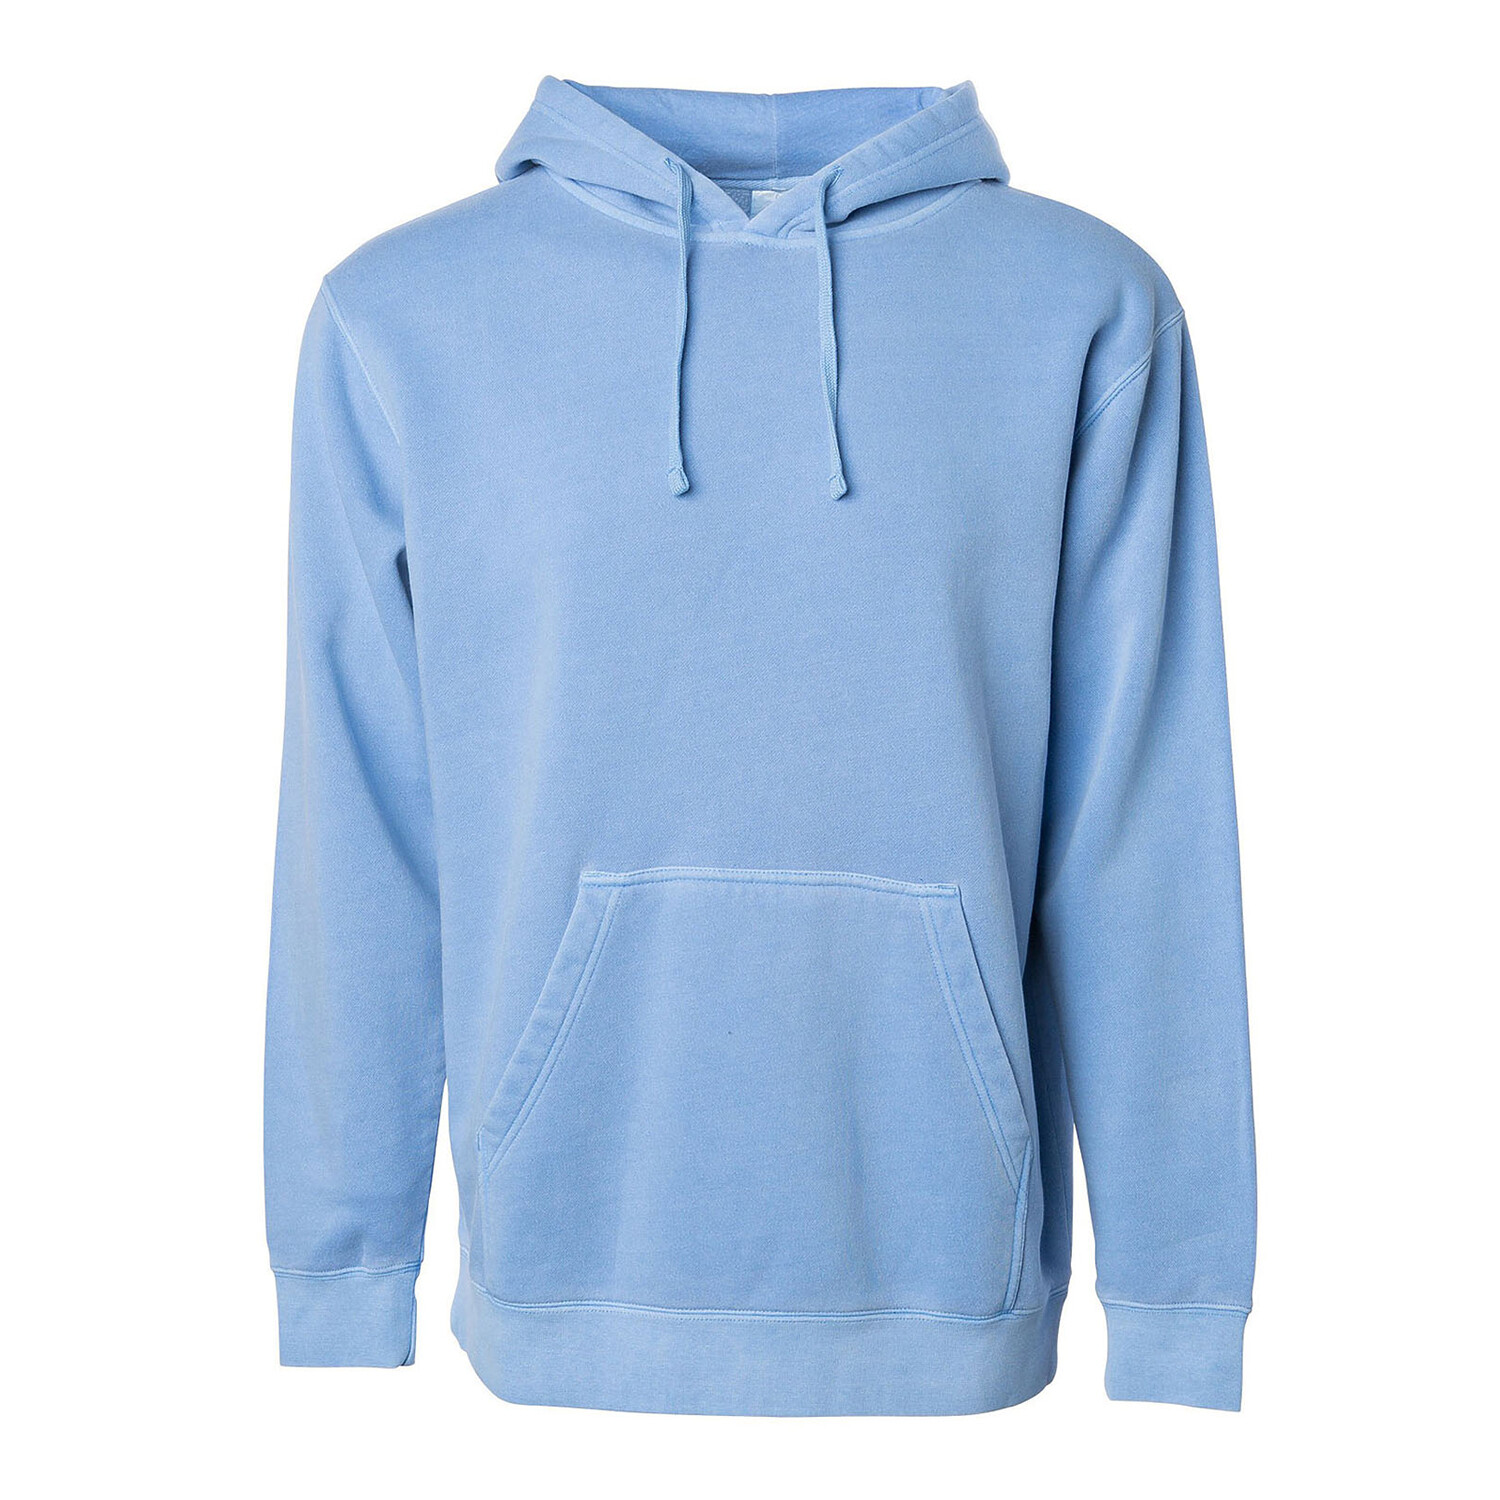 Pigment Dyed Hoodies // Light Blue (S) - Ethan Williams - Touch of Modern